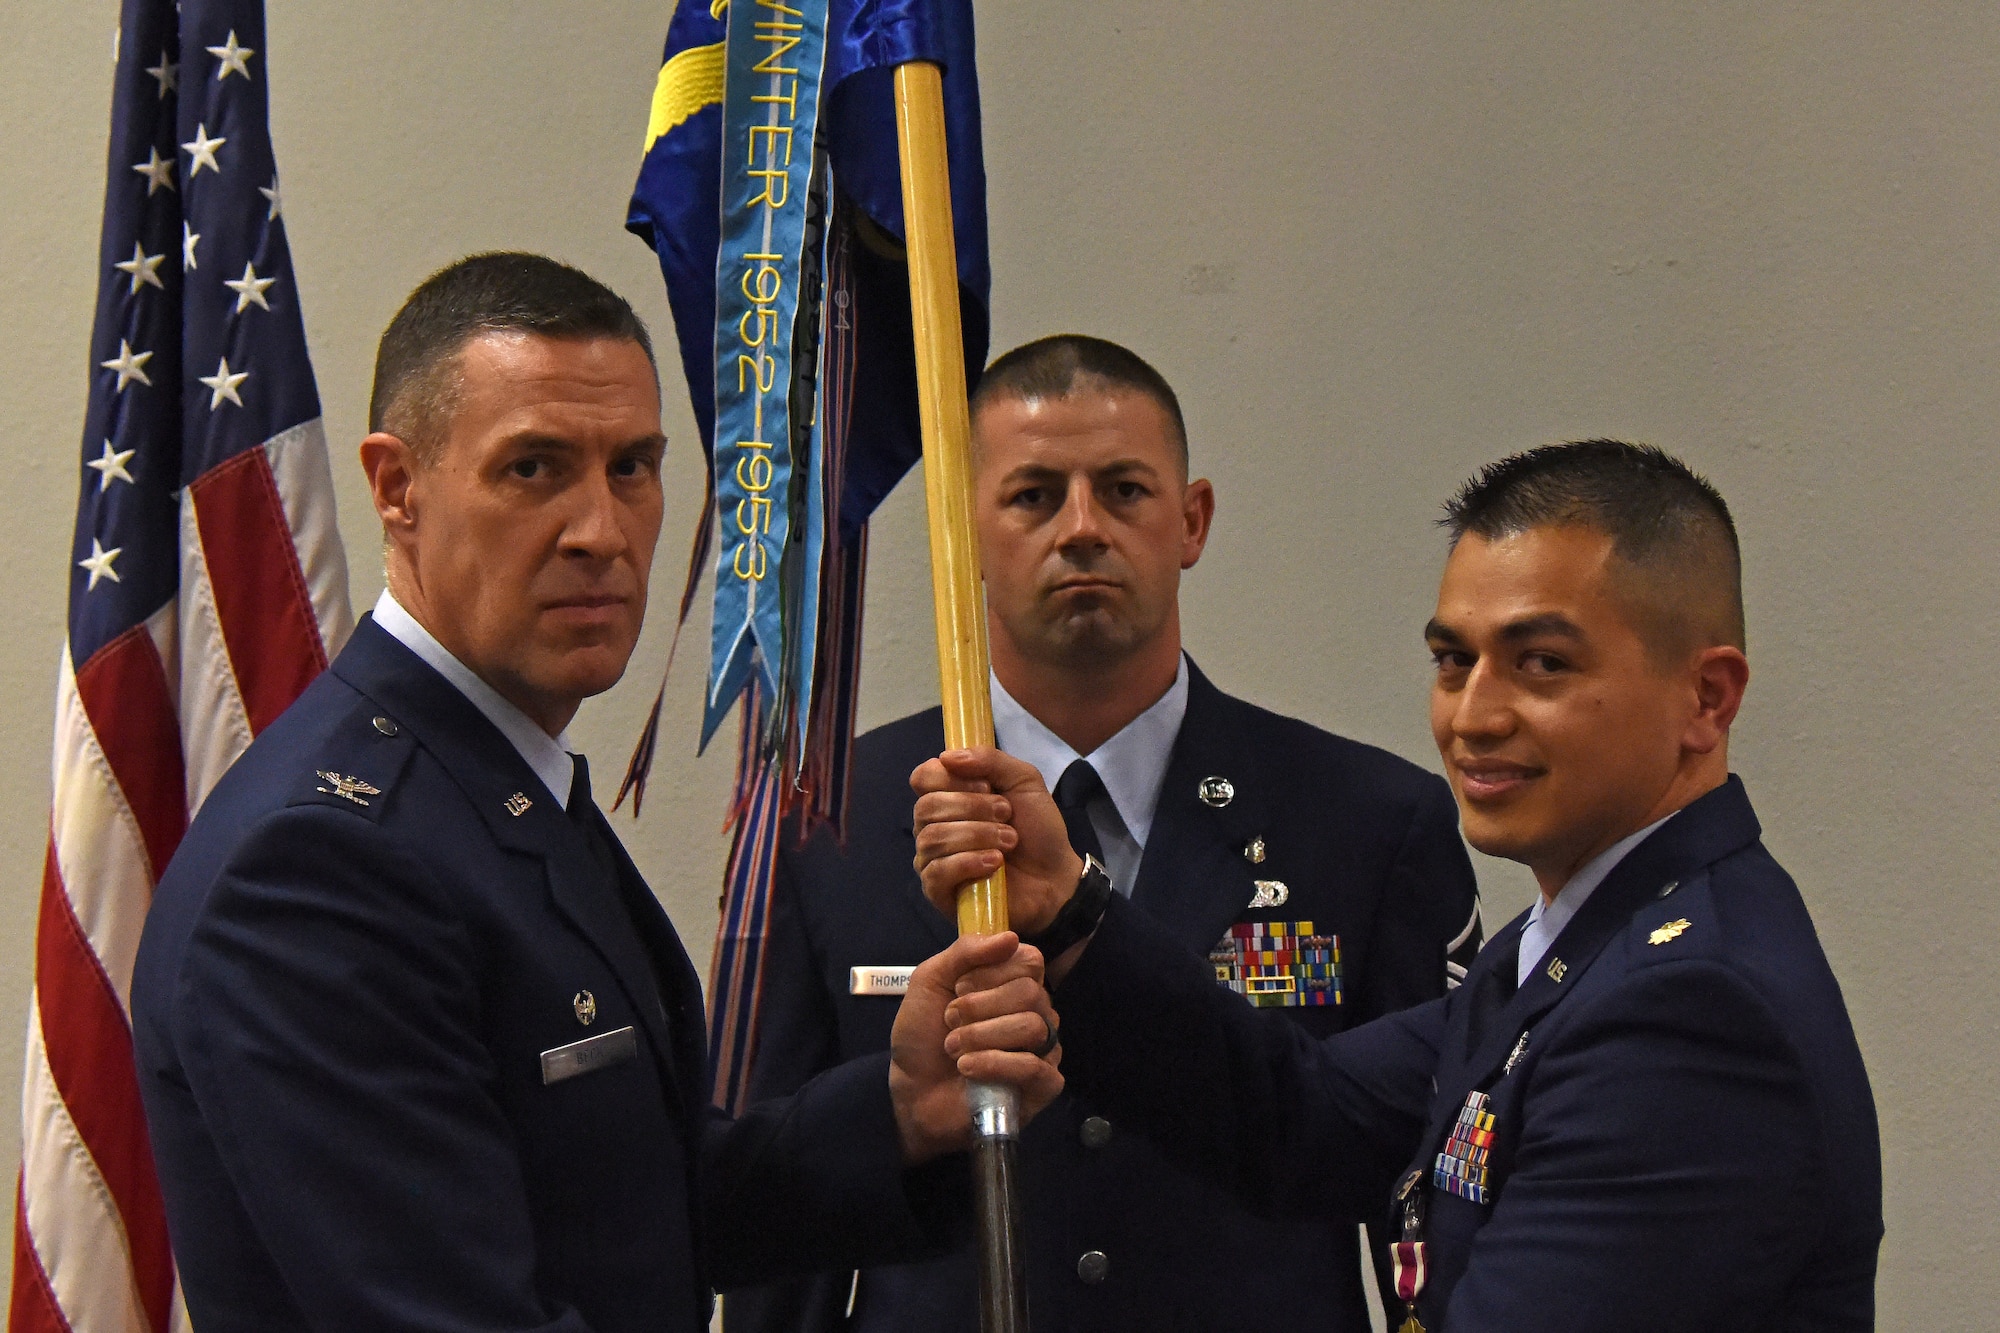 U.S. Air Force Col. Jason Beck, 17th Mission Support Group commander, receives the guideon from Maj. Mark Walkusky, 17th Communications Squadron commander, during the change of command ceremony in the Event center on Goodfellow Air Force Base, Texas, May 10, 2018. The change of command ceremony is a time honored military tradition that signifies the orderly transfer of authority. (U.S. Air Force photo by Airman 1st Class Zachary Chapman/Released)